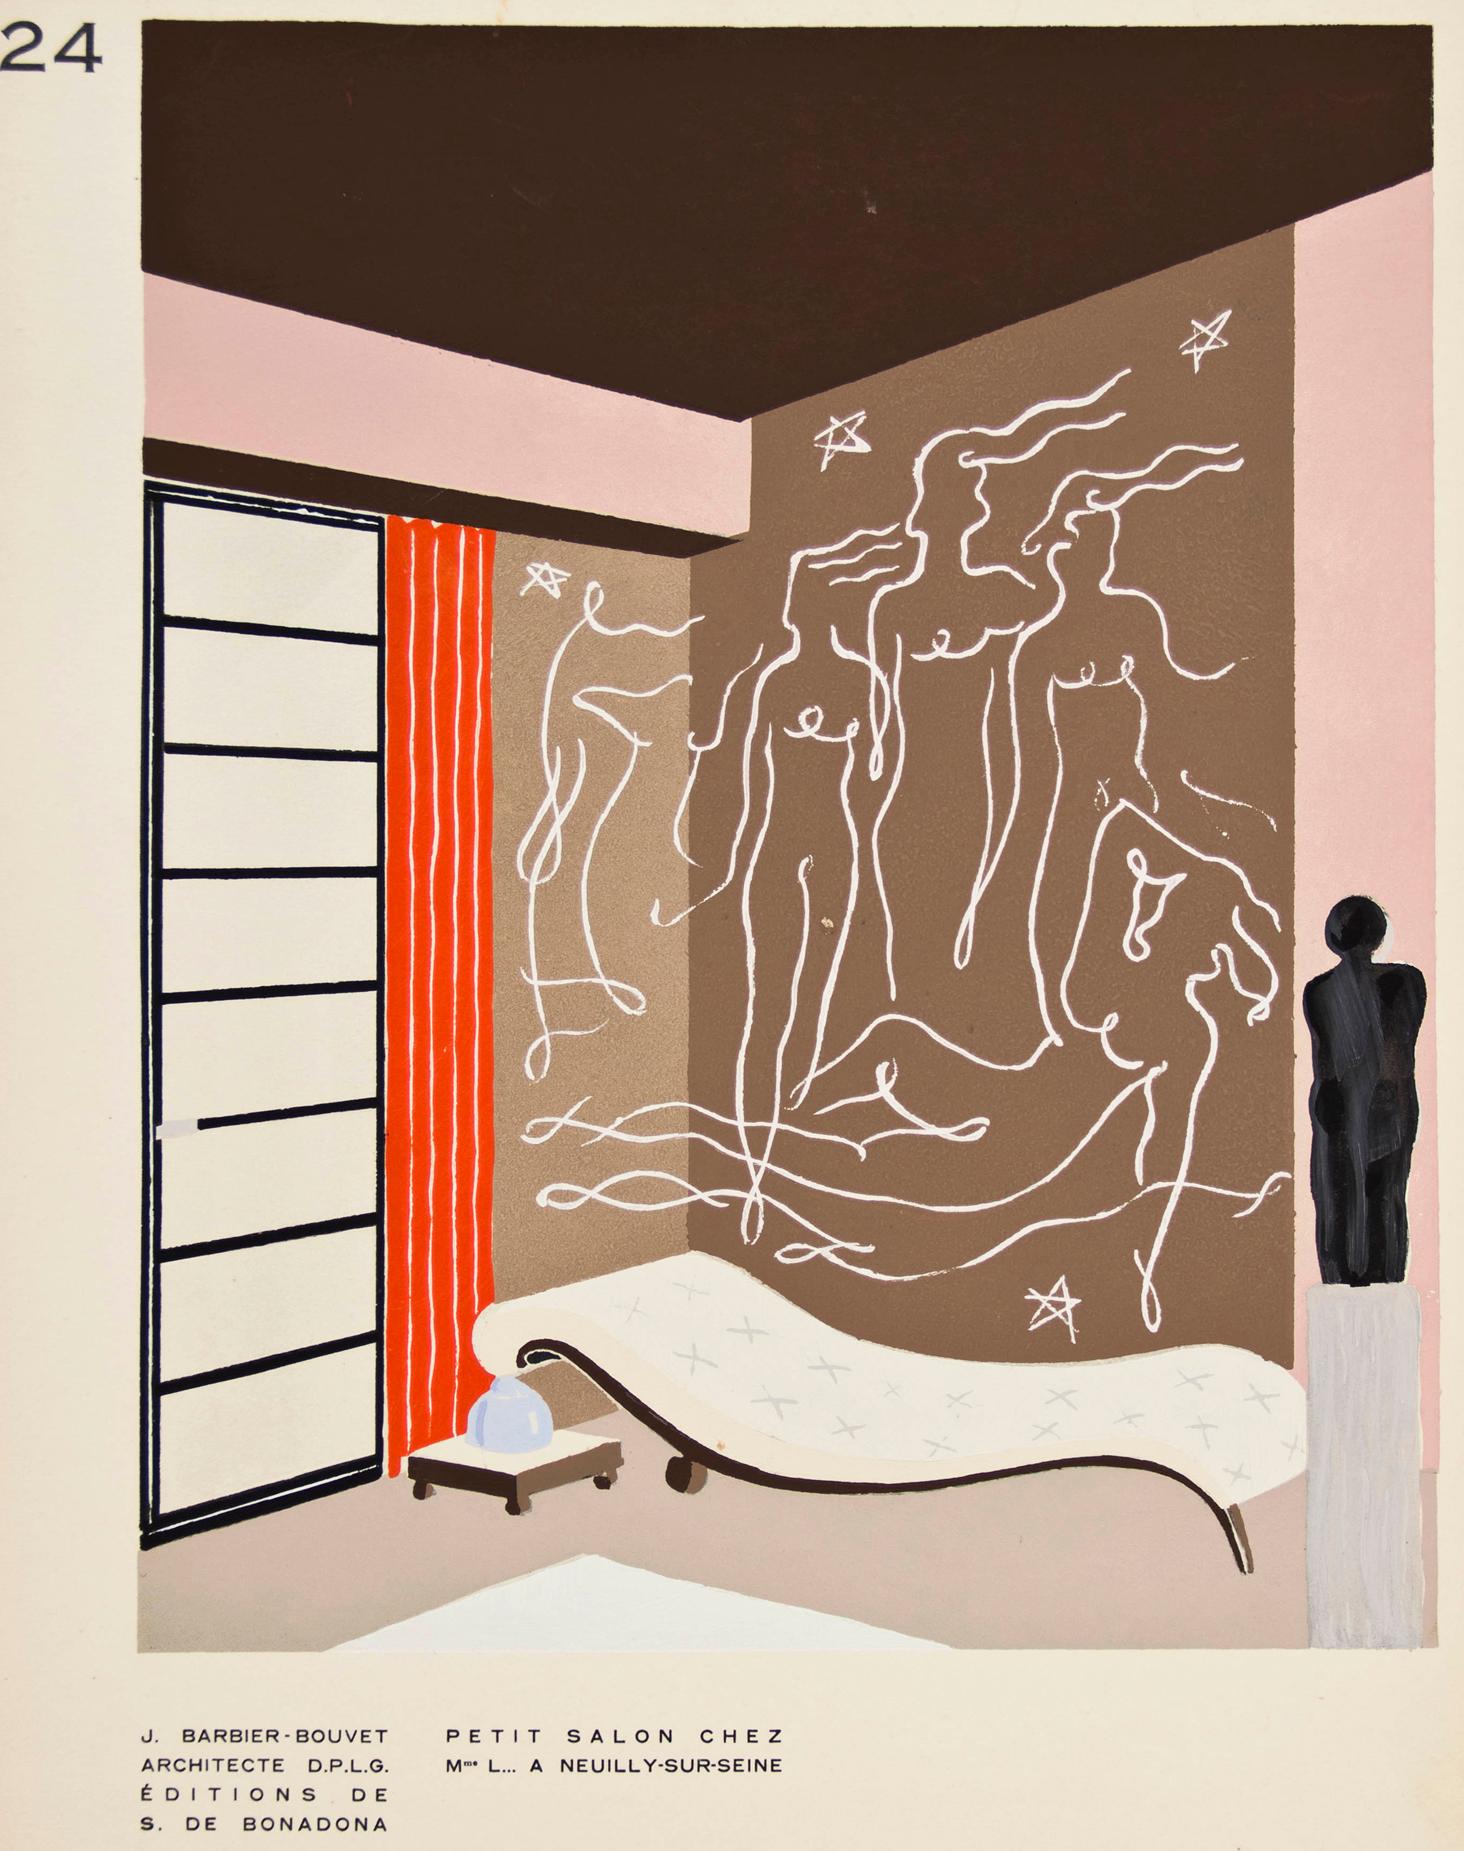 Pochoir of a Living Room with Matisse Style Mural